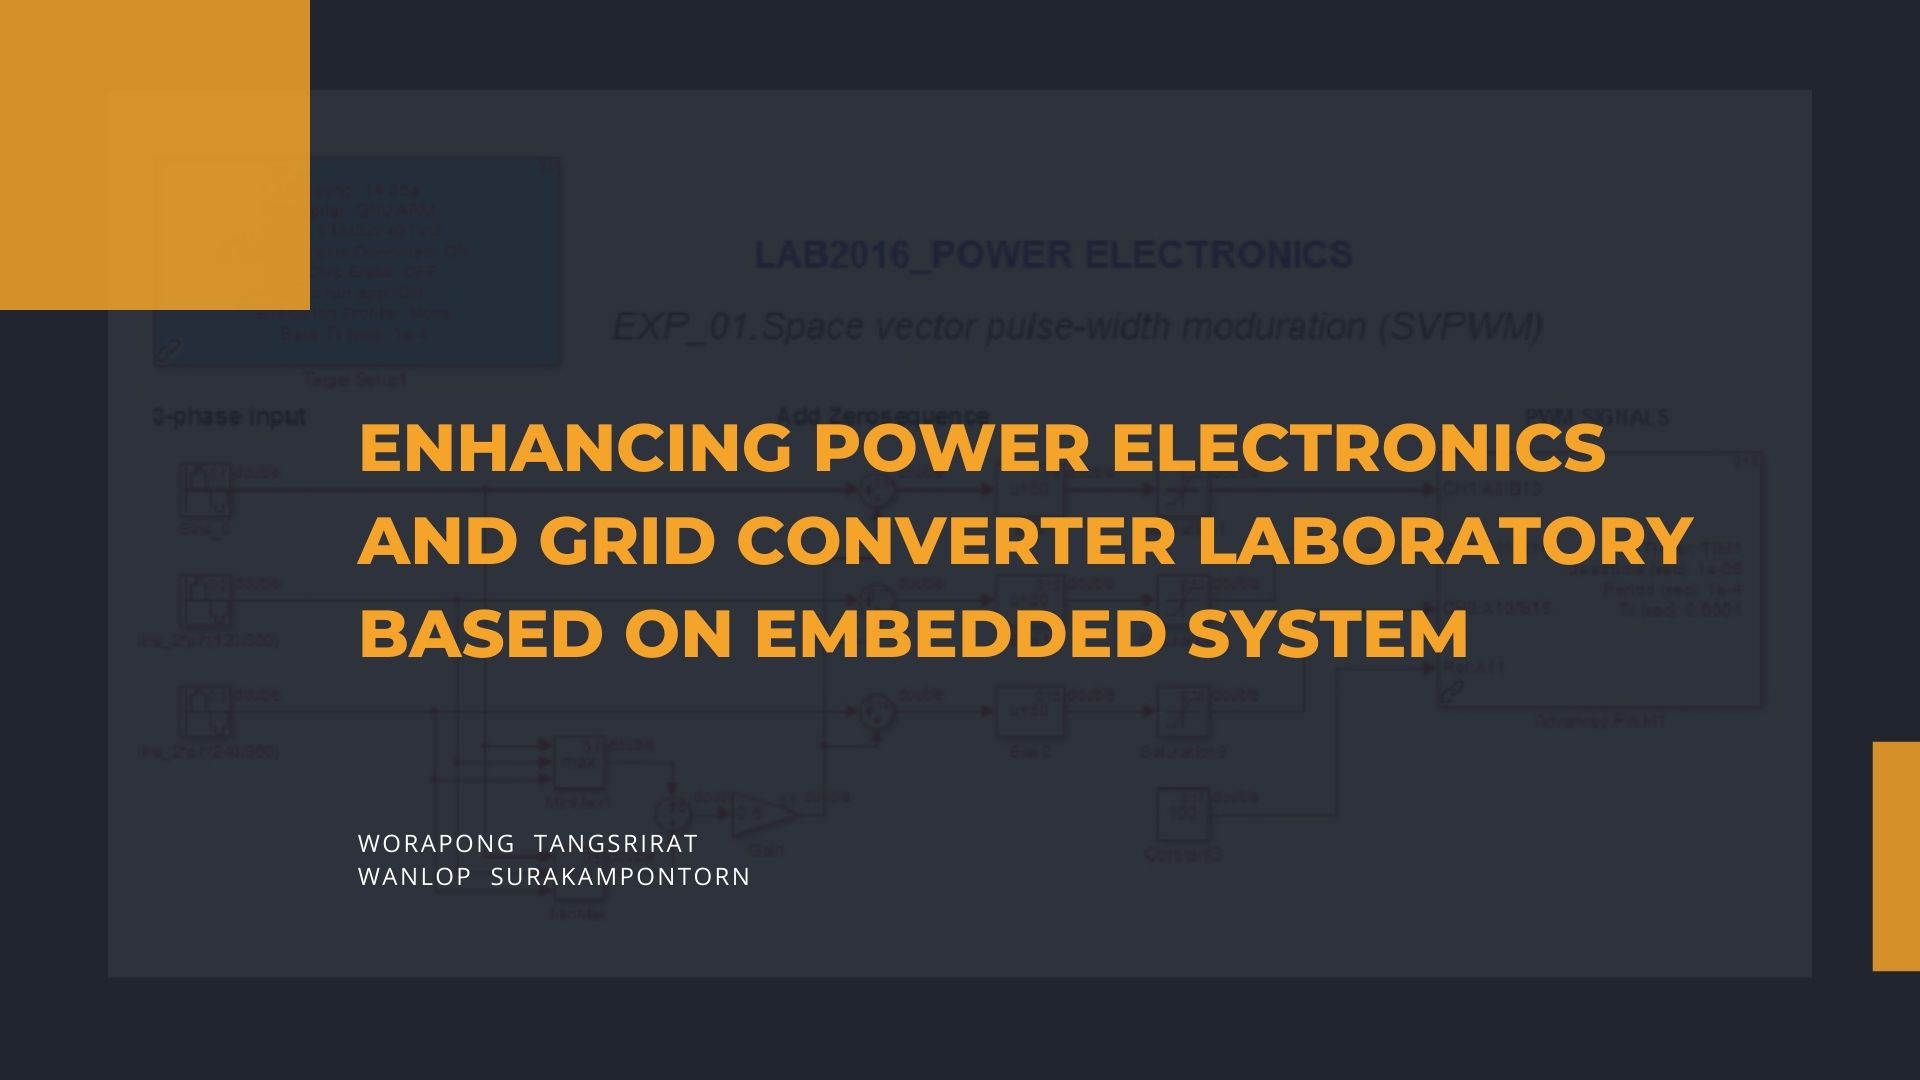 Enhancing Power Electronics and Grid Converter Laboratory Based on Embedded System